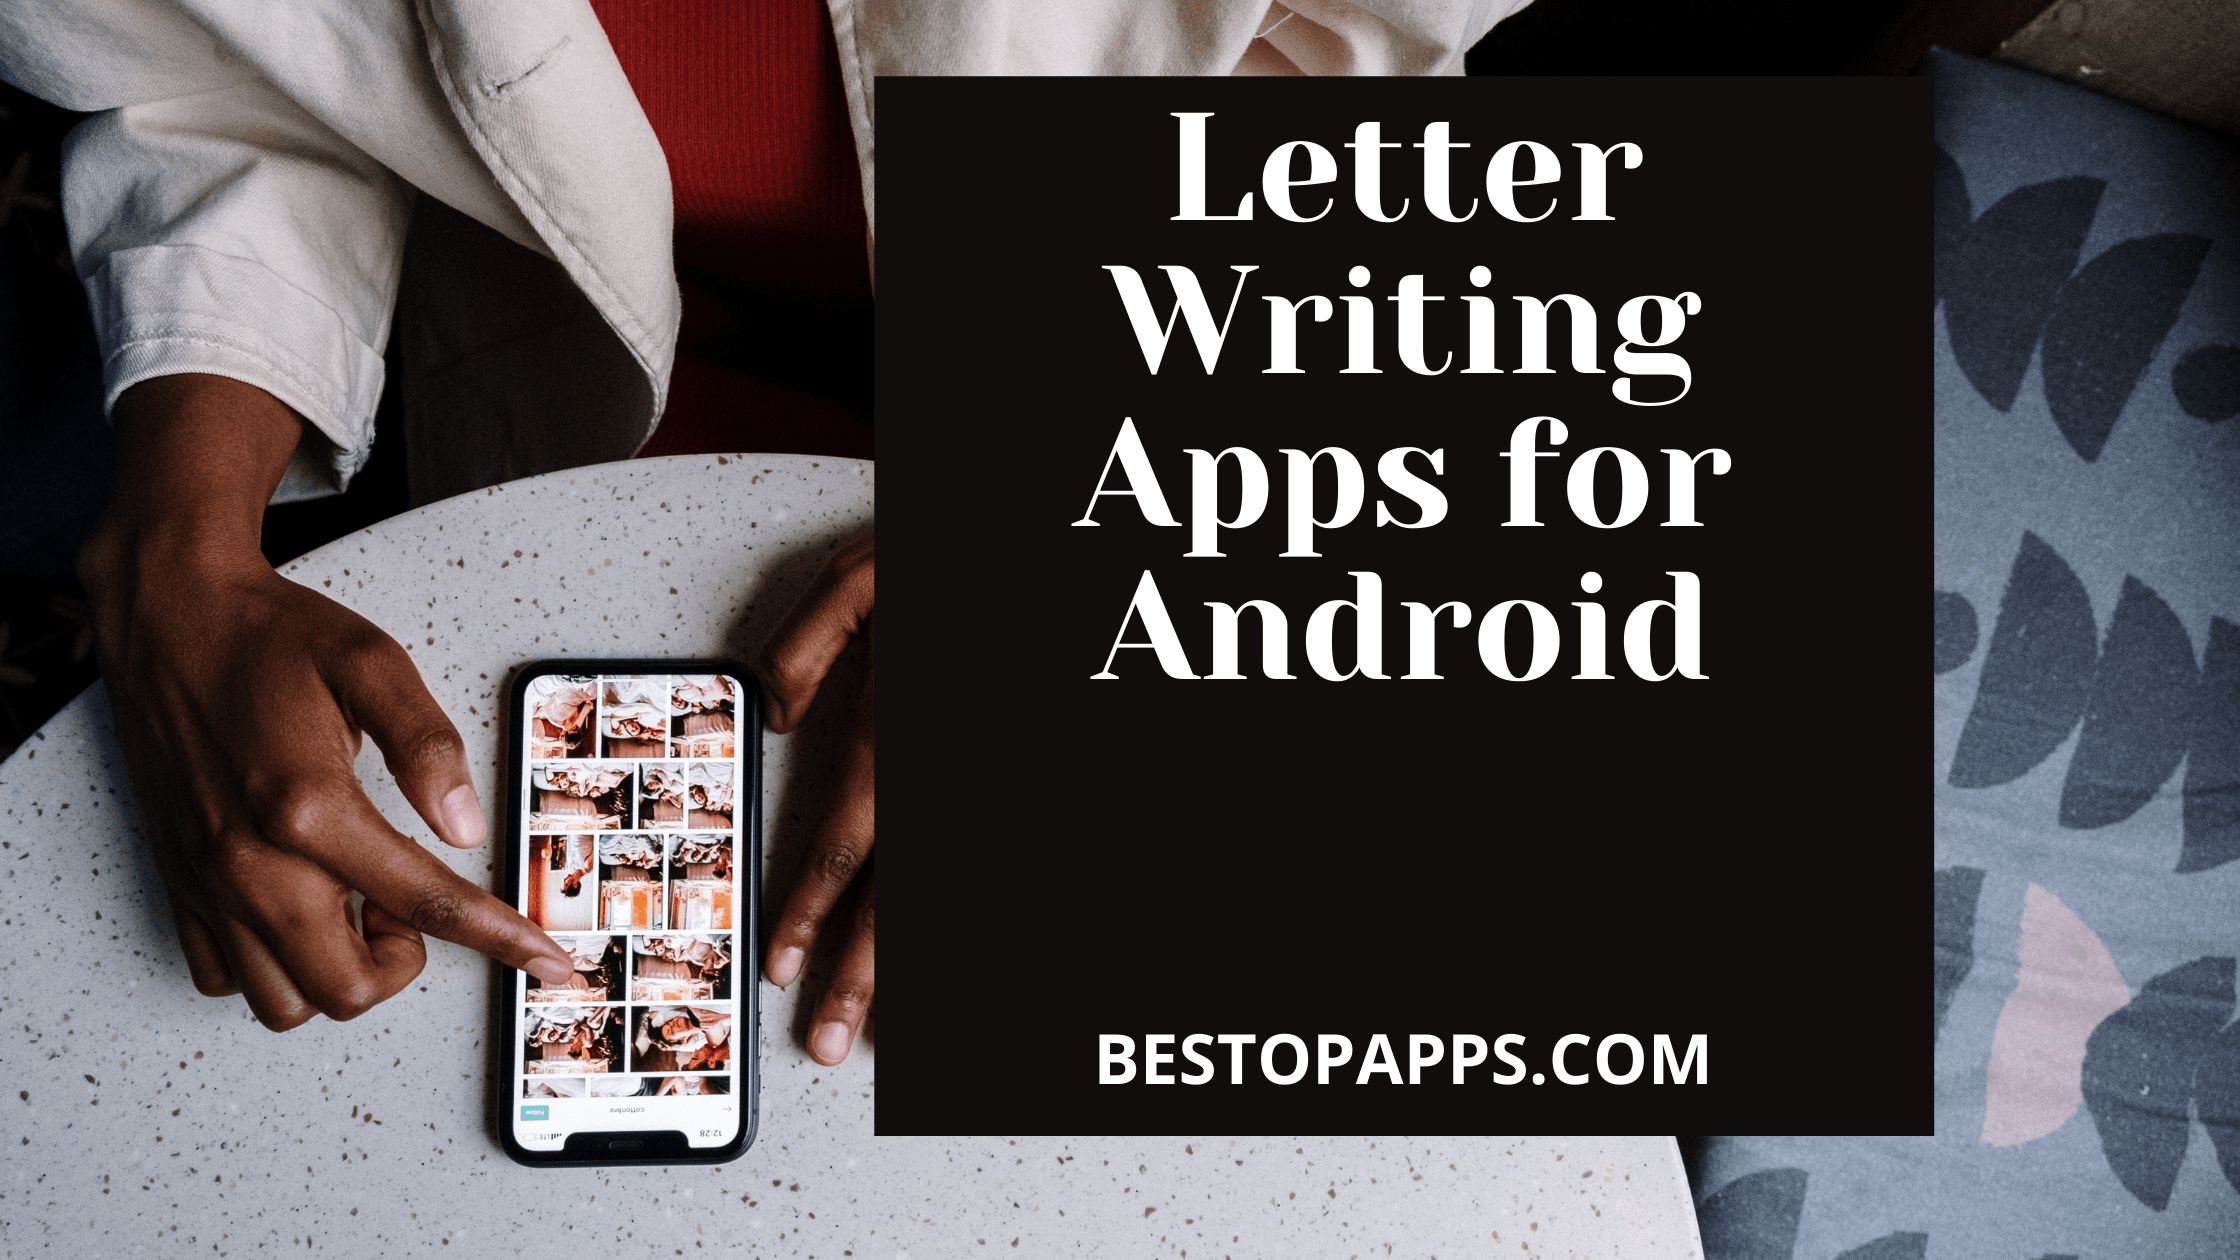 Letter Writing Apps for Android